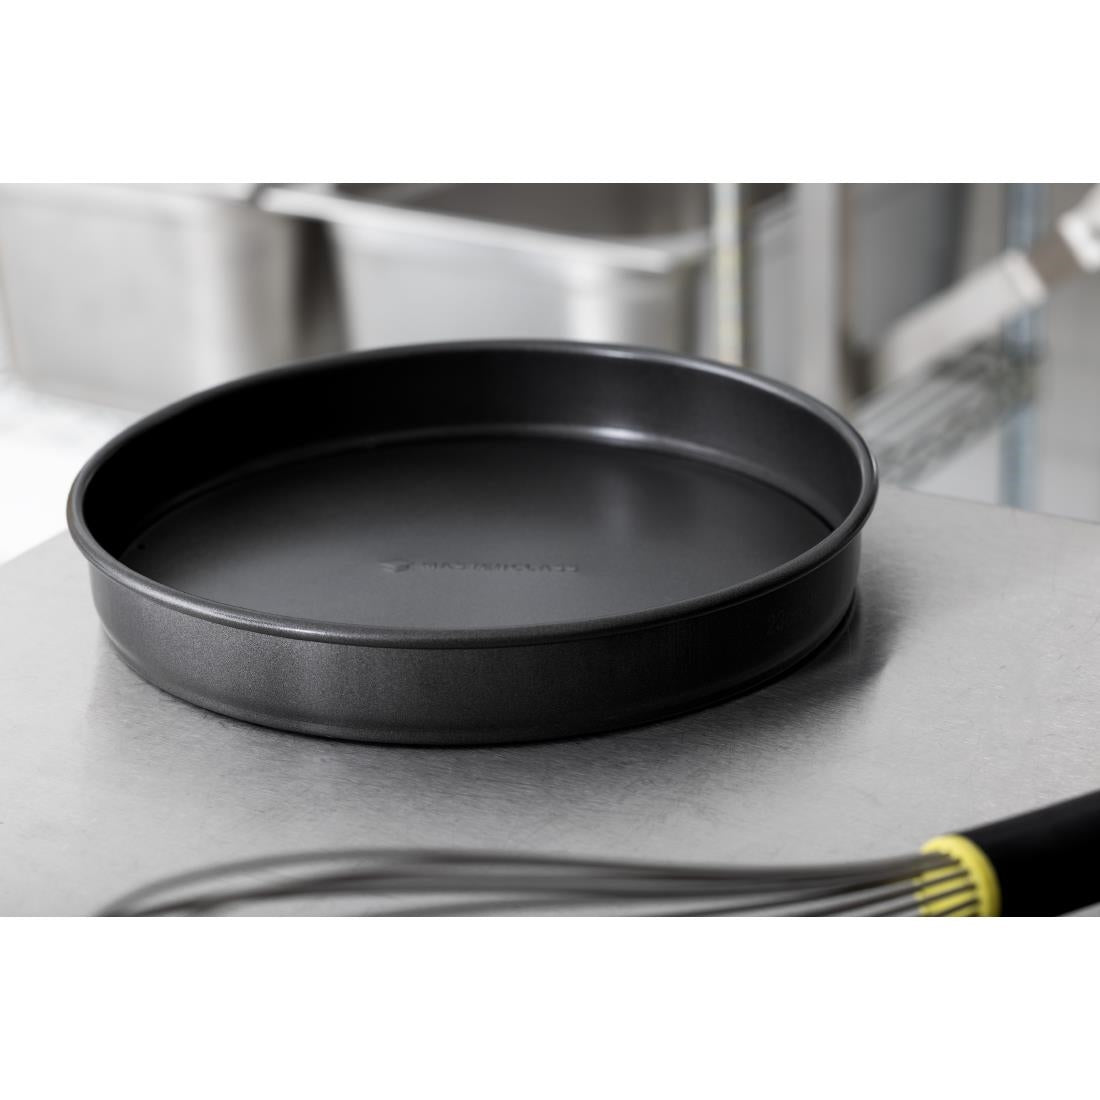 FC359 Masterclass Non-Stick Loose Base Round Sandwich Pan 230mm JD Catering Equipment Solutions Ltd